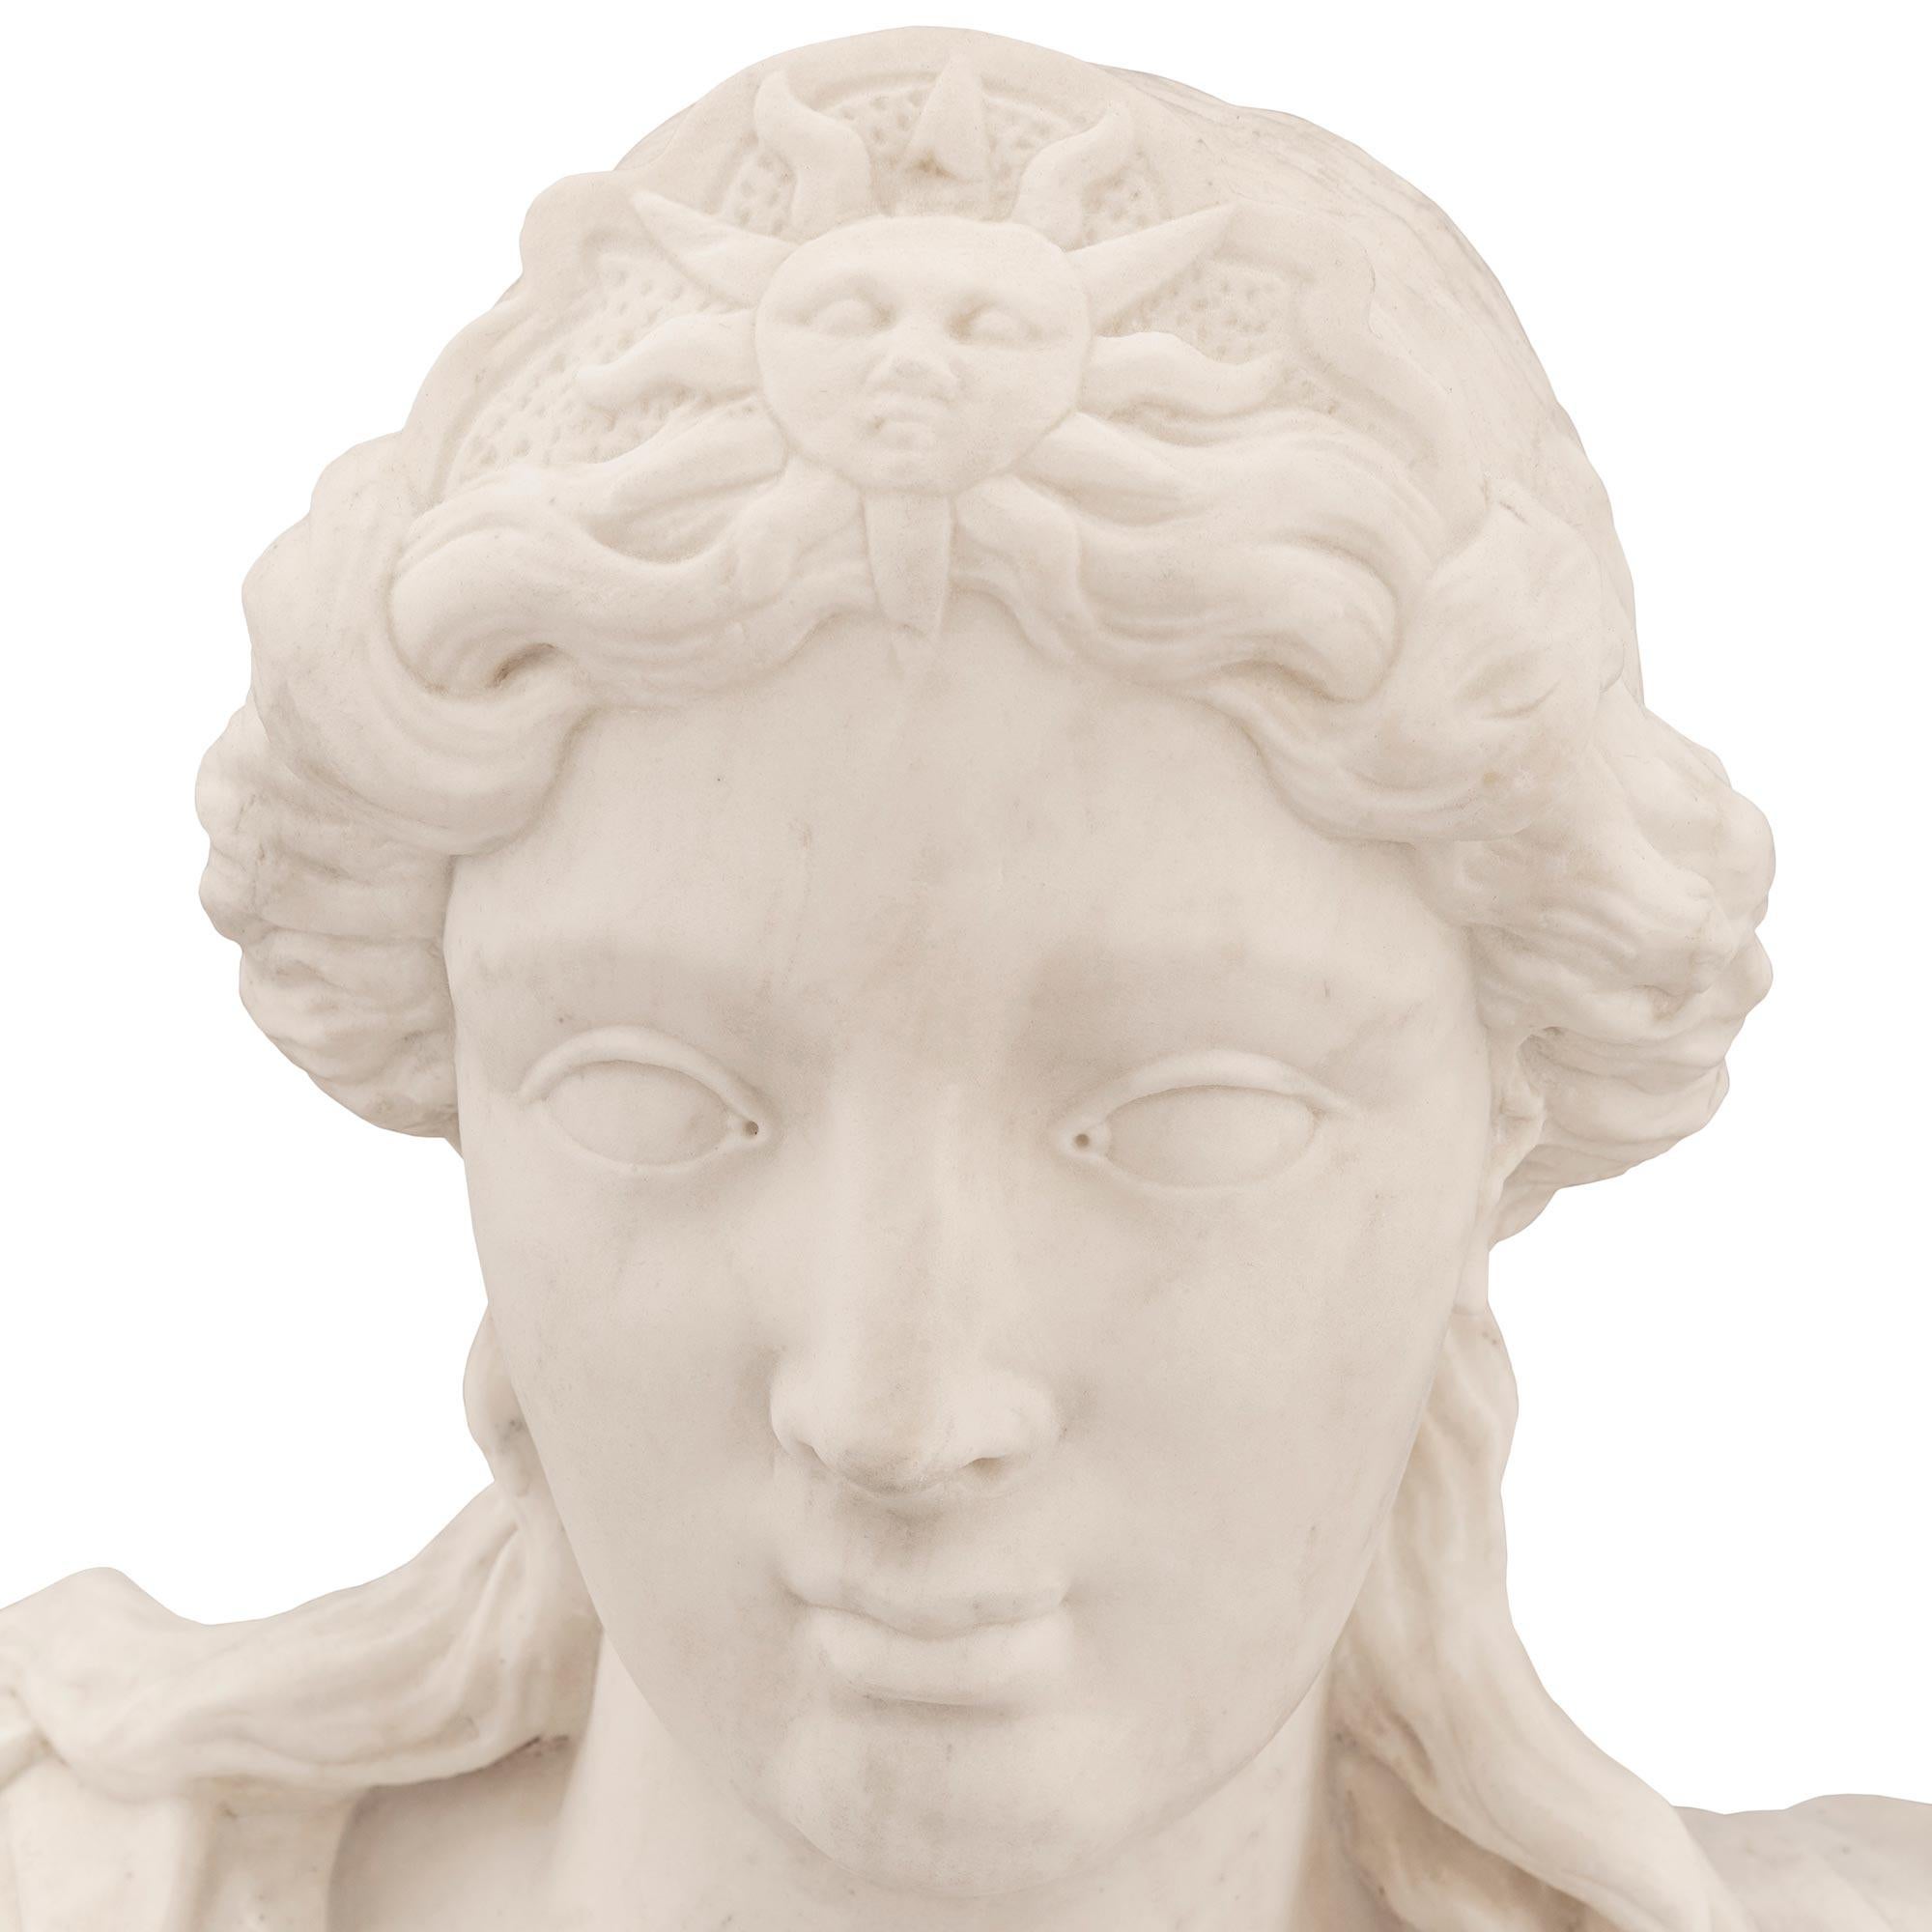 Italian, Late 17th / Early 18th Century, White Carrara Marble Bust of Athena For Sale 1